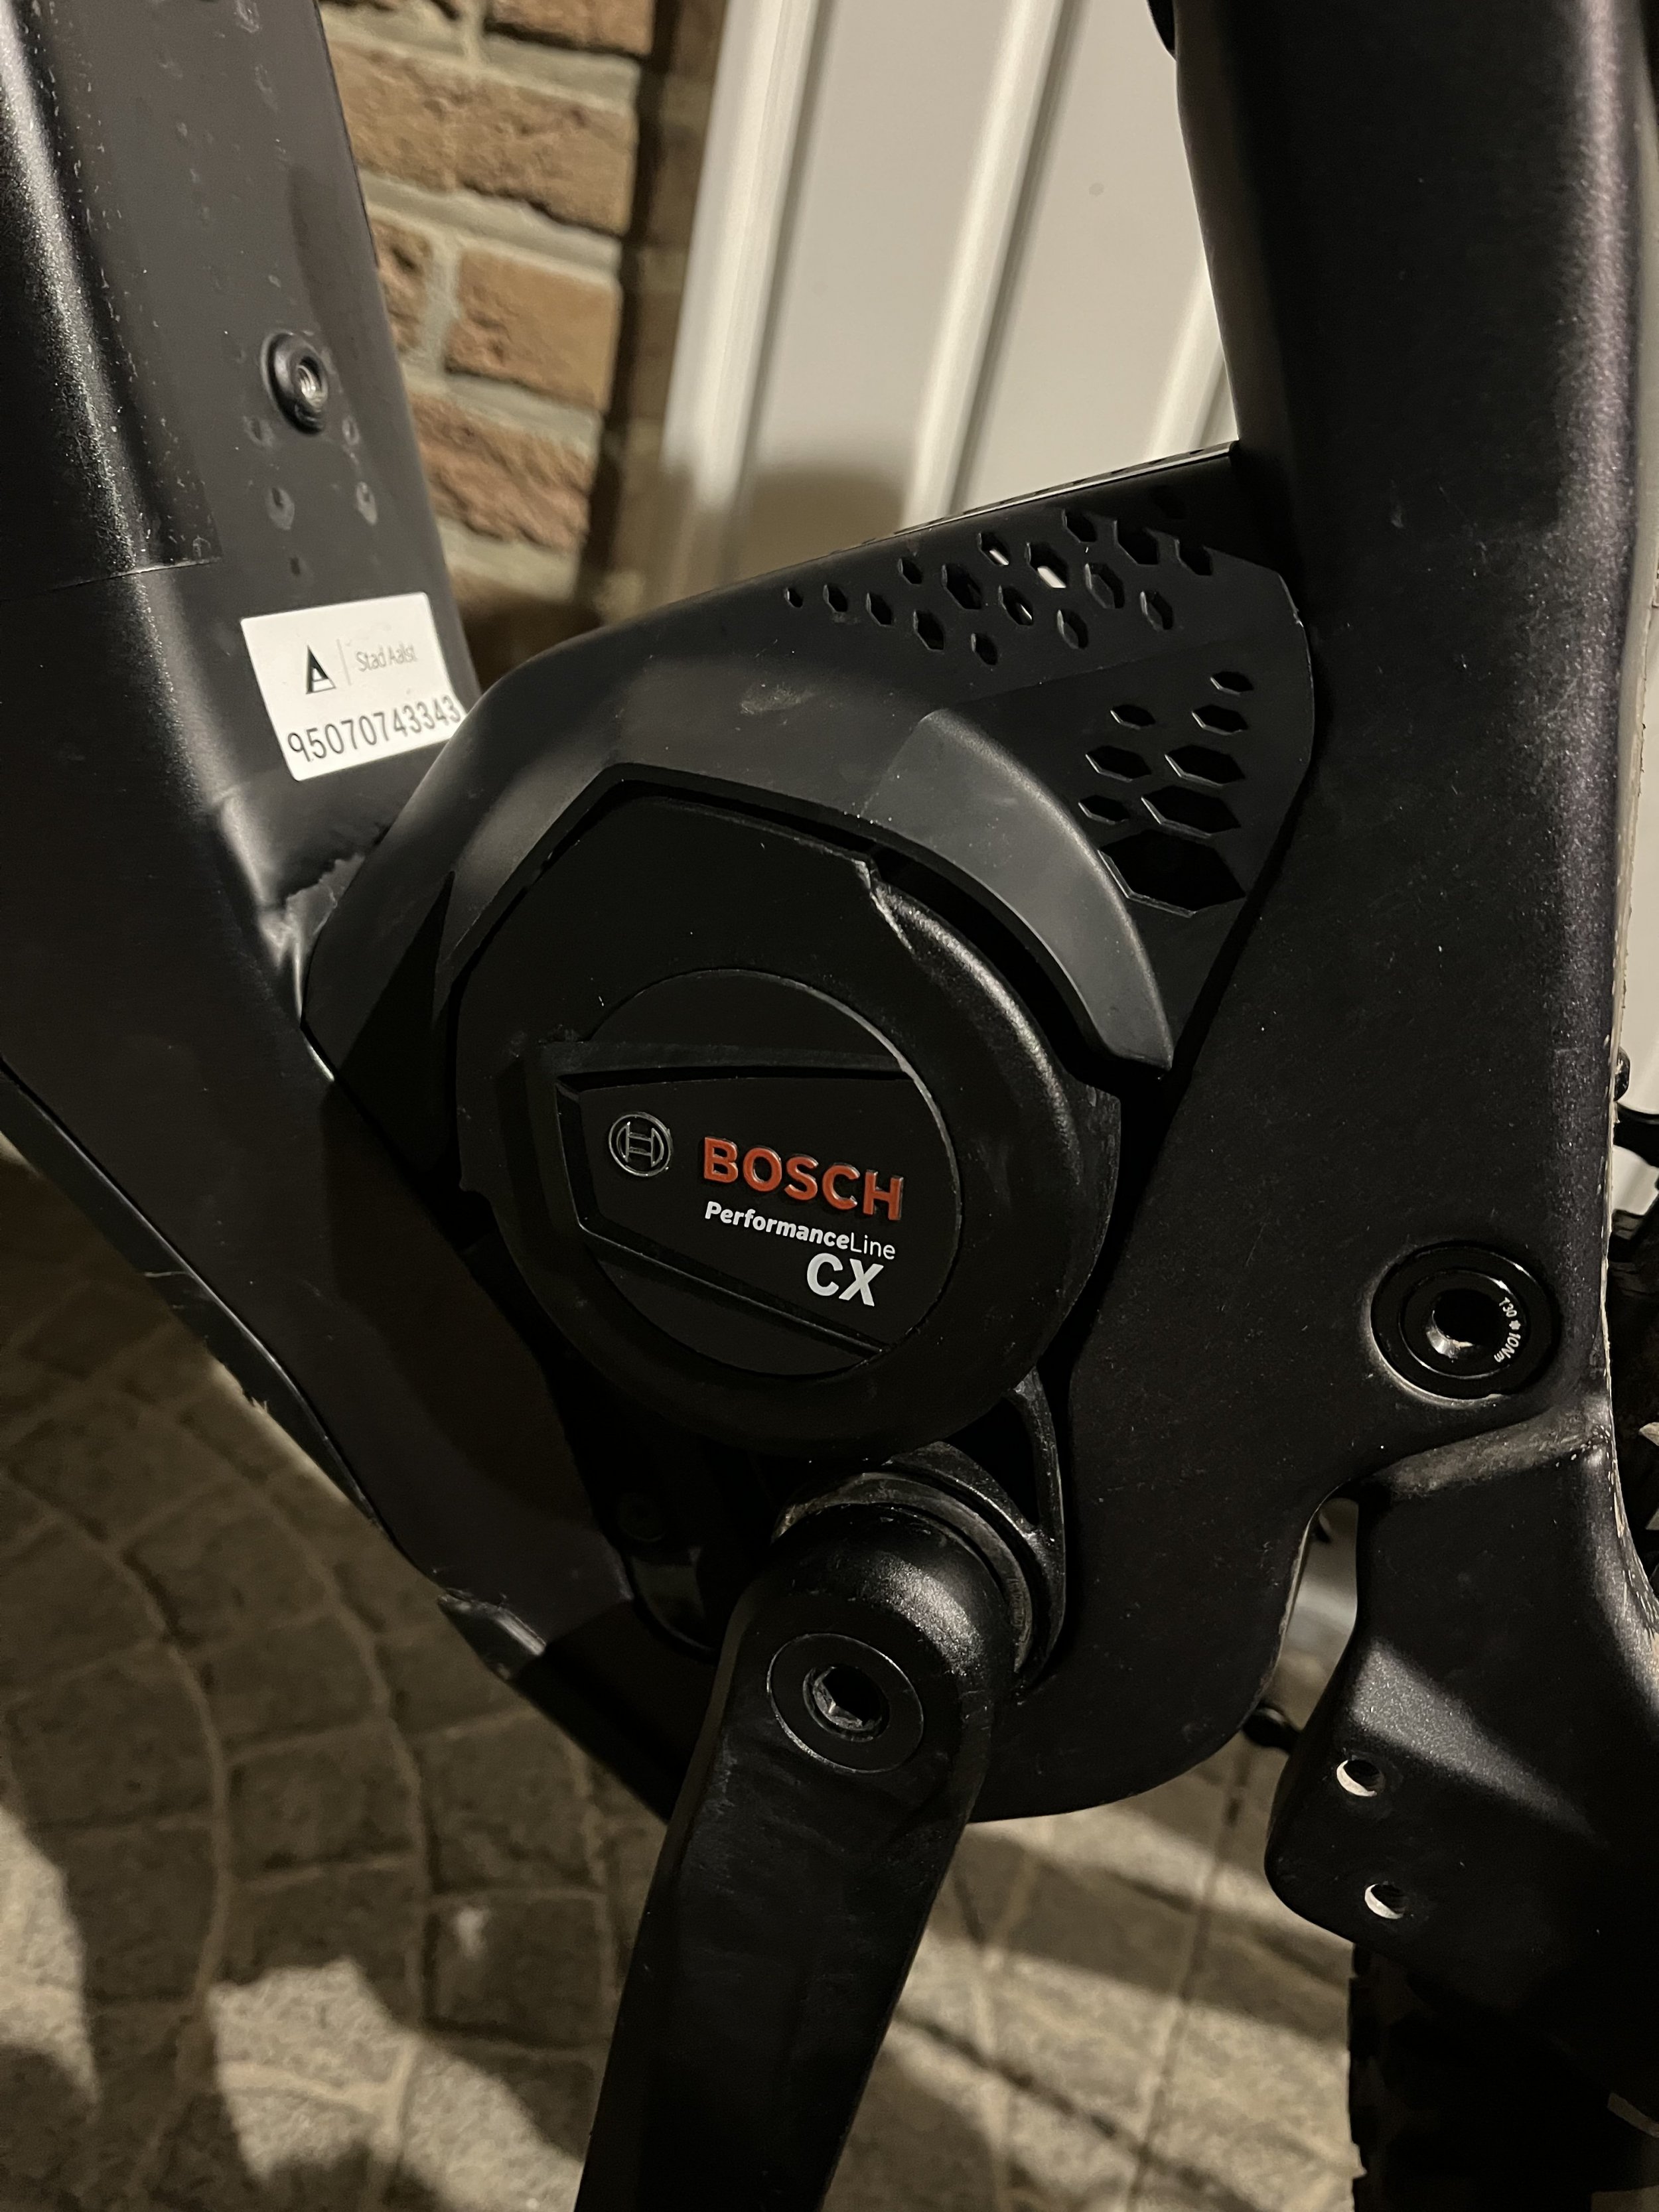 How To Derestrict a Bosch eBike including Smart System – EBIKE TUNER